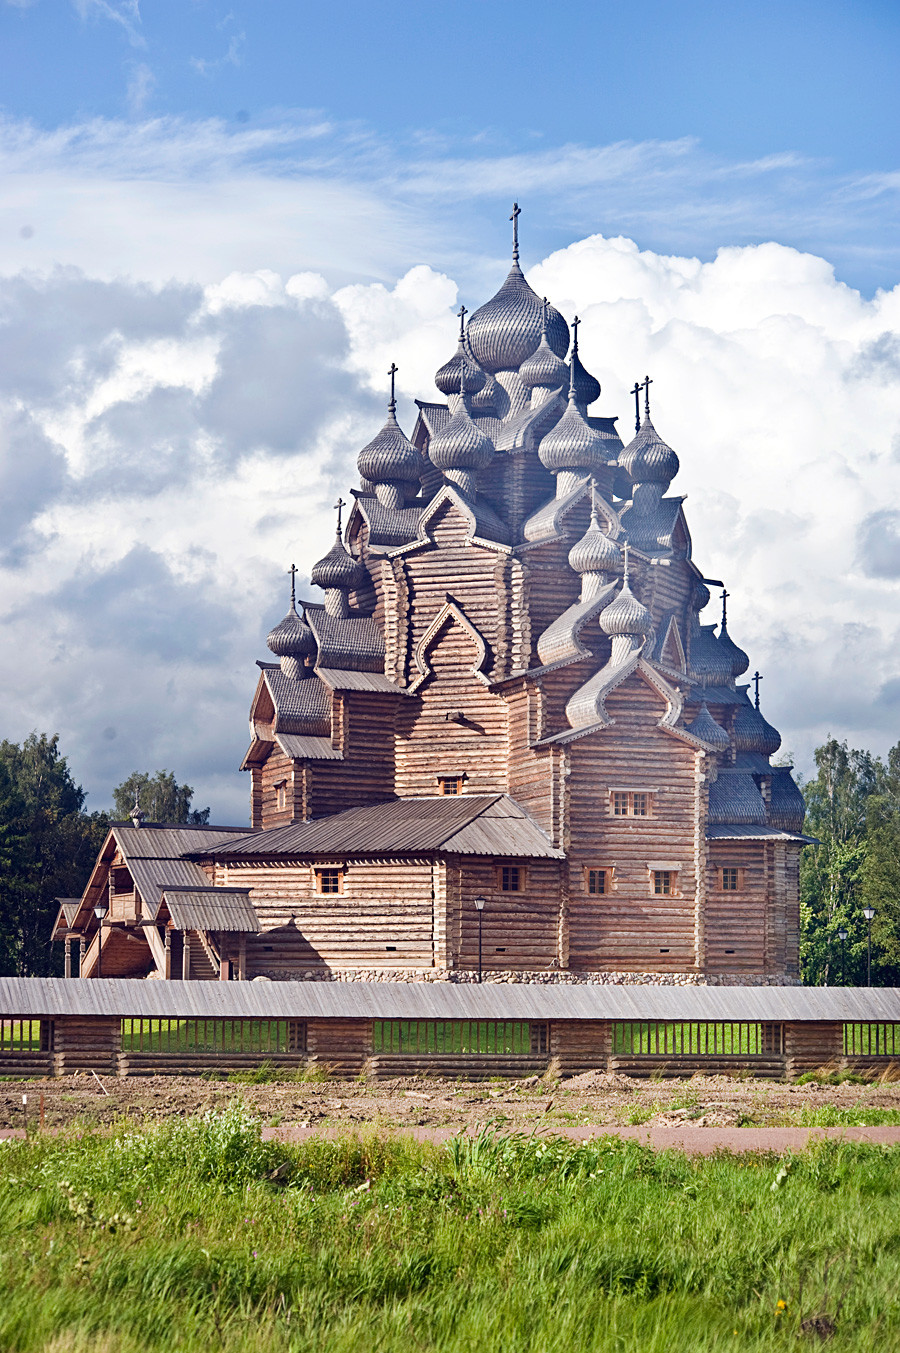 Bogoslovka. Church of the Intercession, southwest view. August 17, 2009.